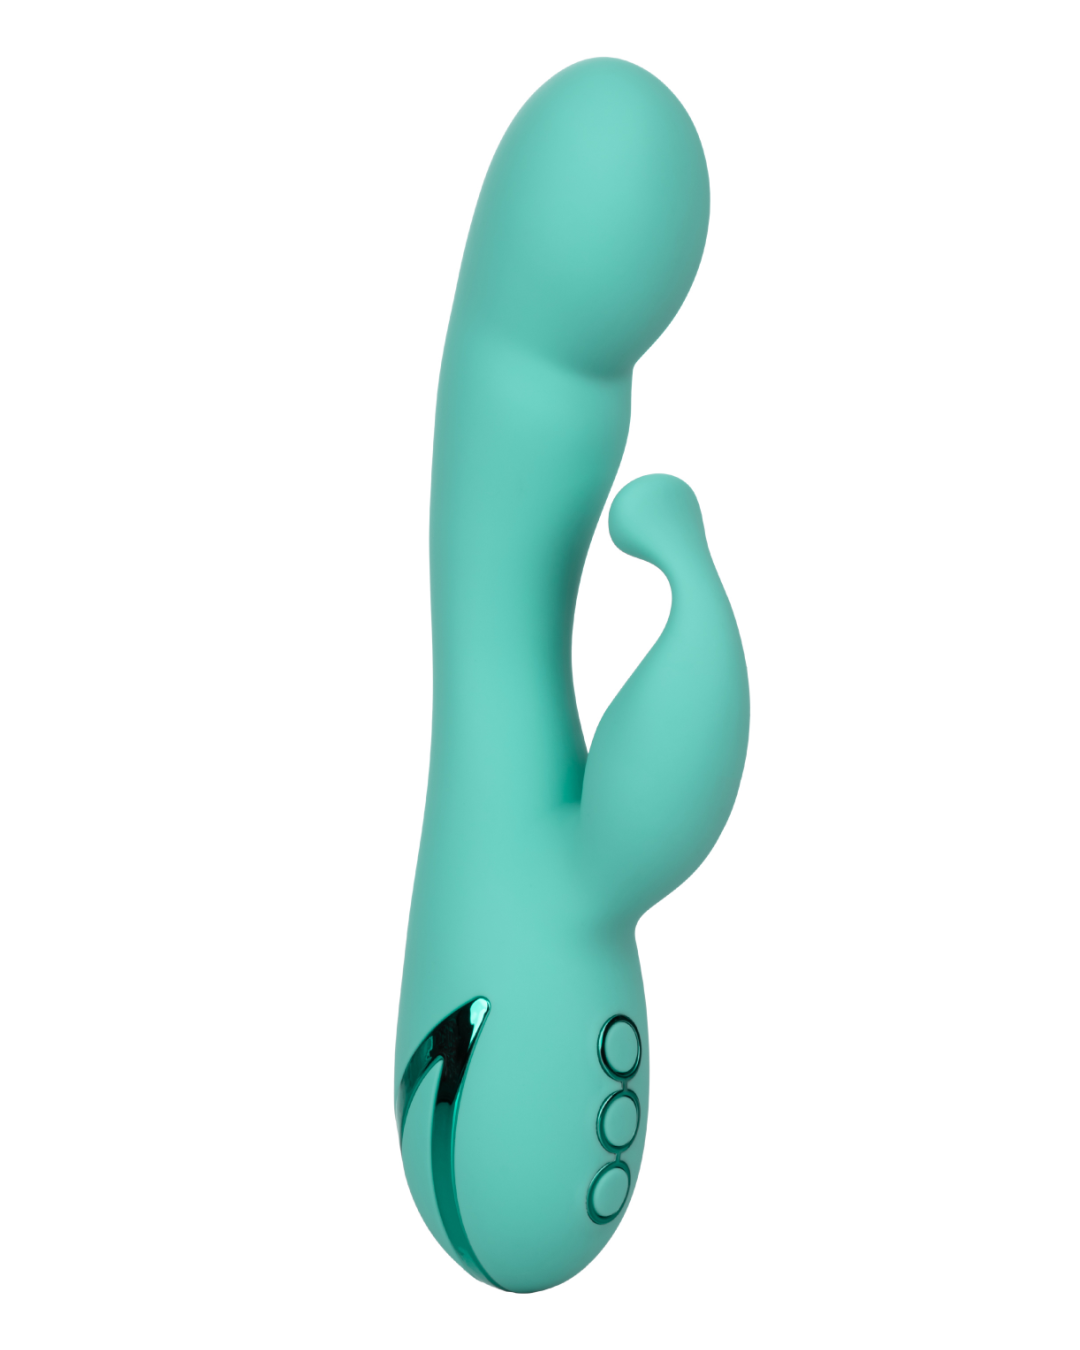 California Dreaming Tahoe Temptation Vibrator side view  of the shaft and teaser